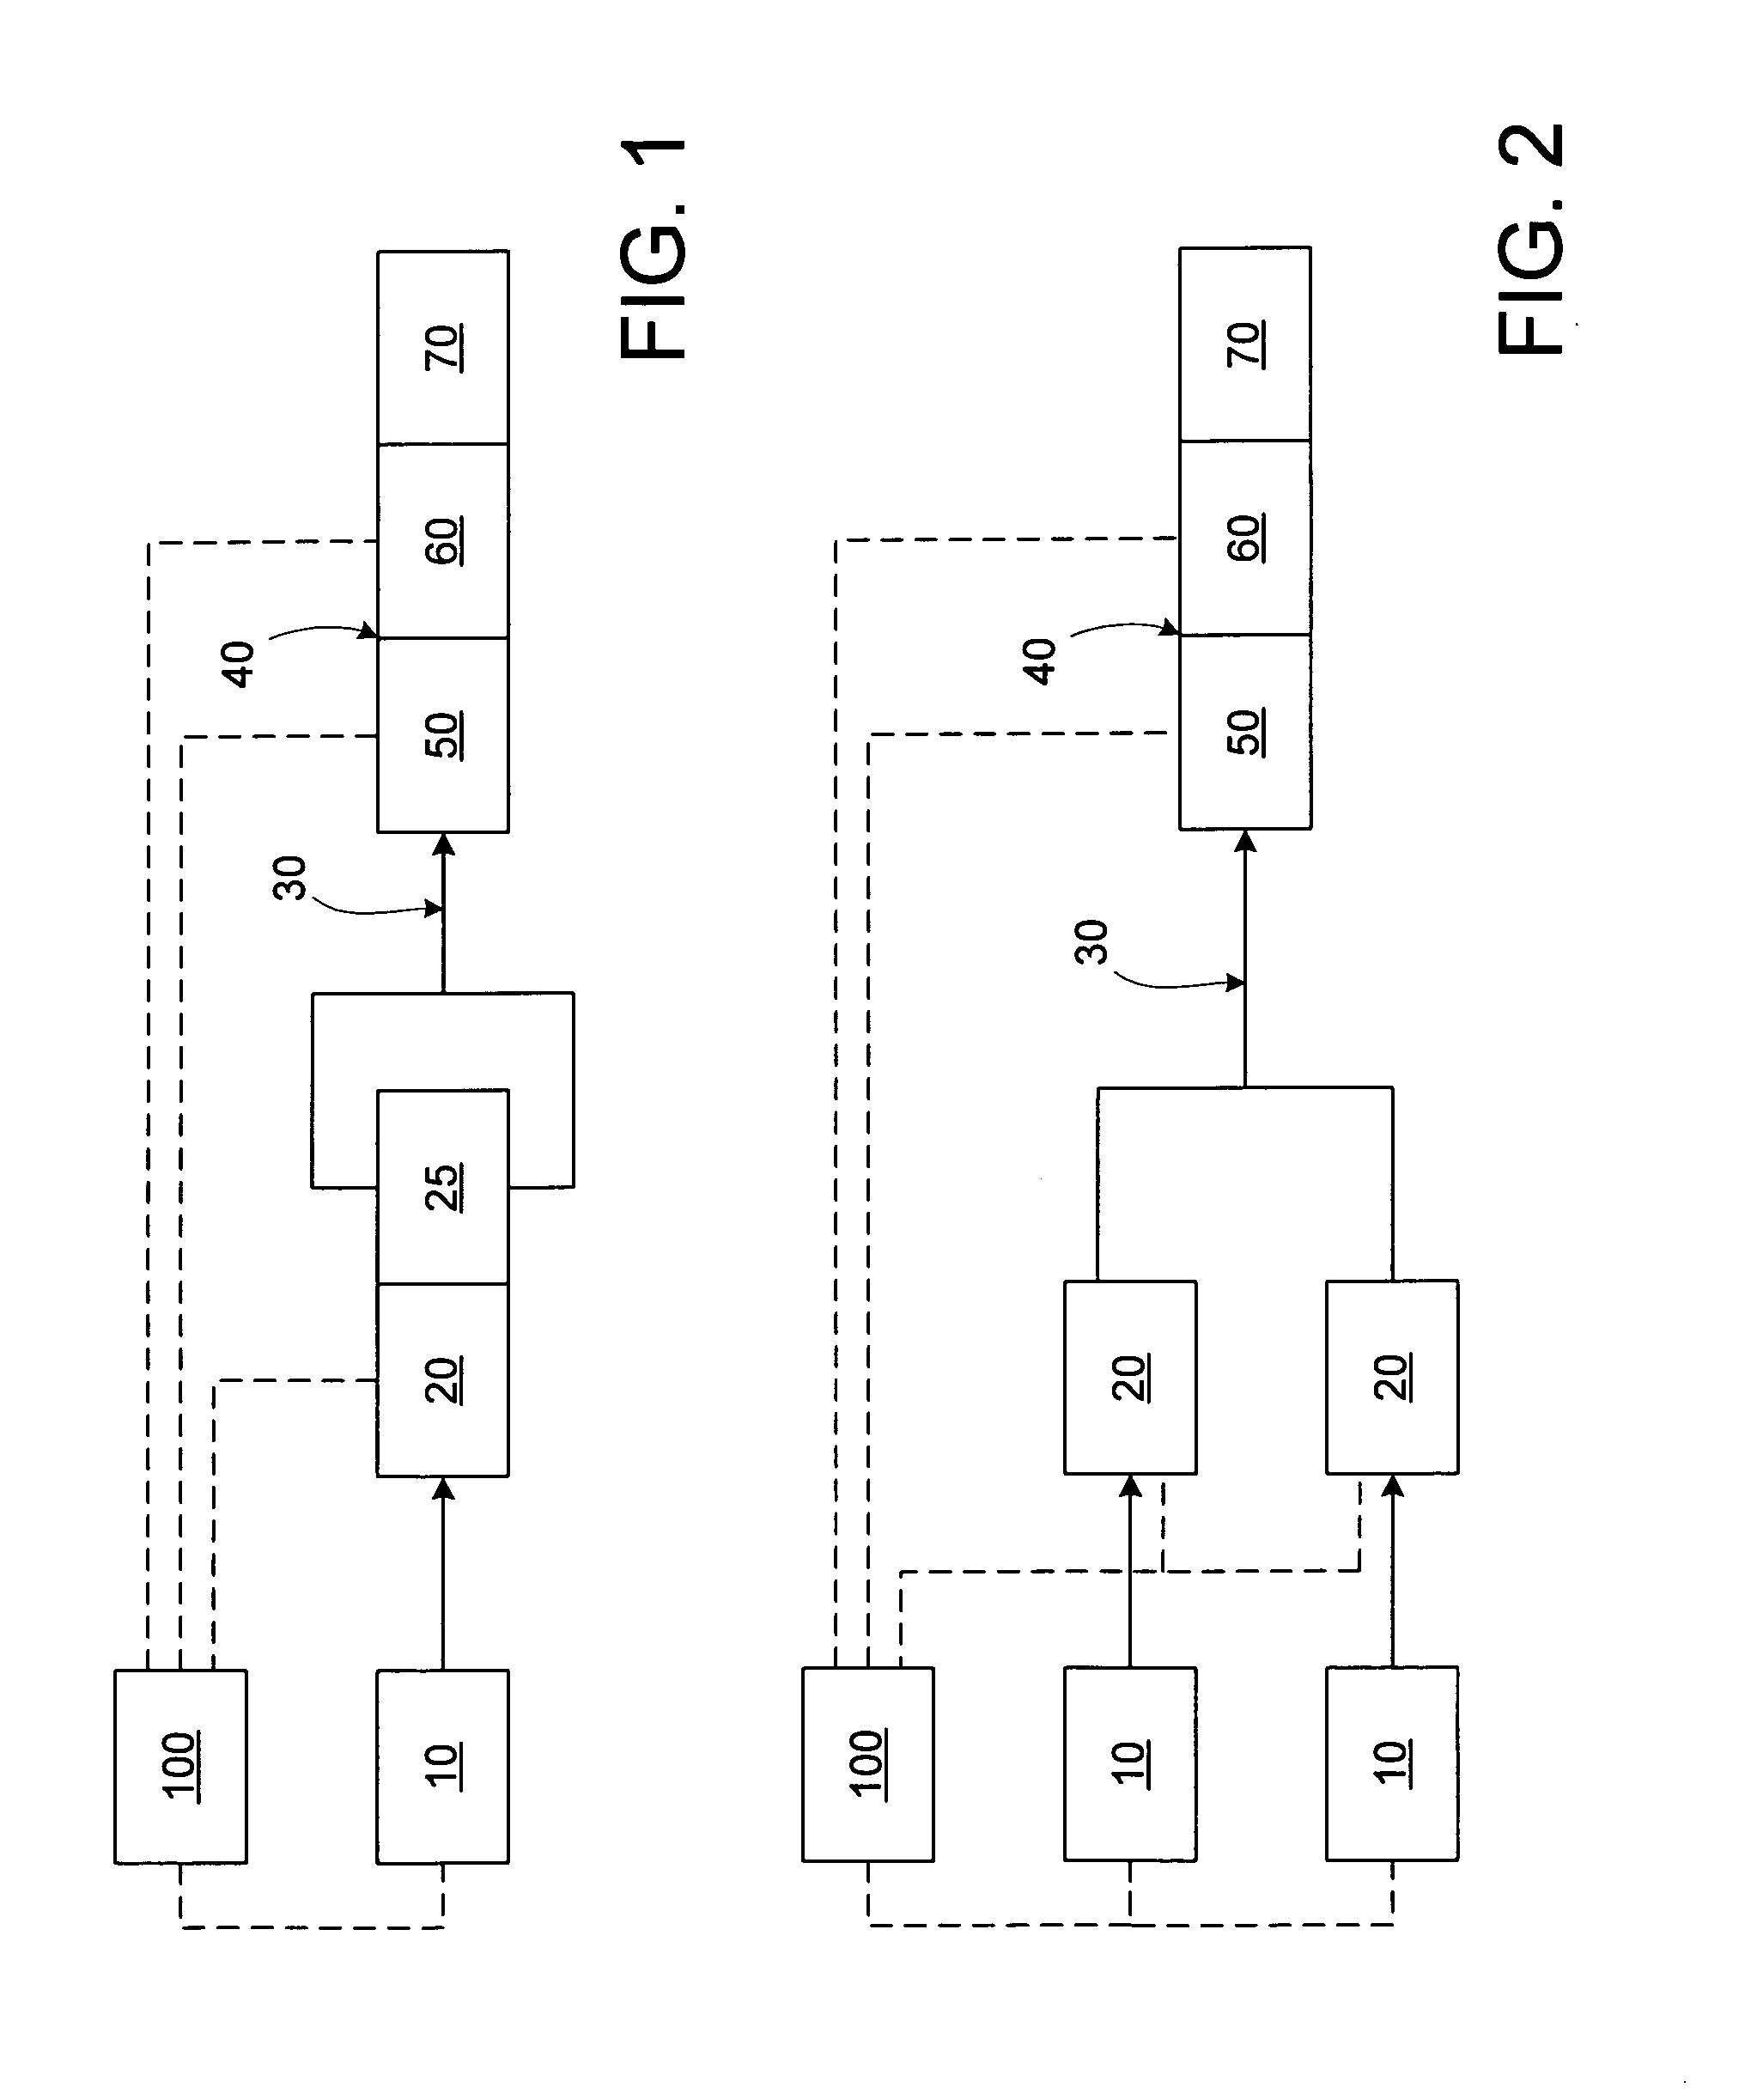 Apparatus and method for performing radiation energy treatments